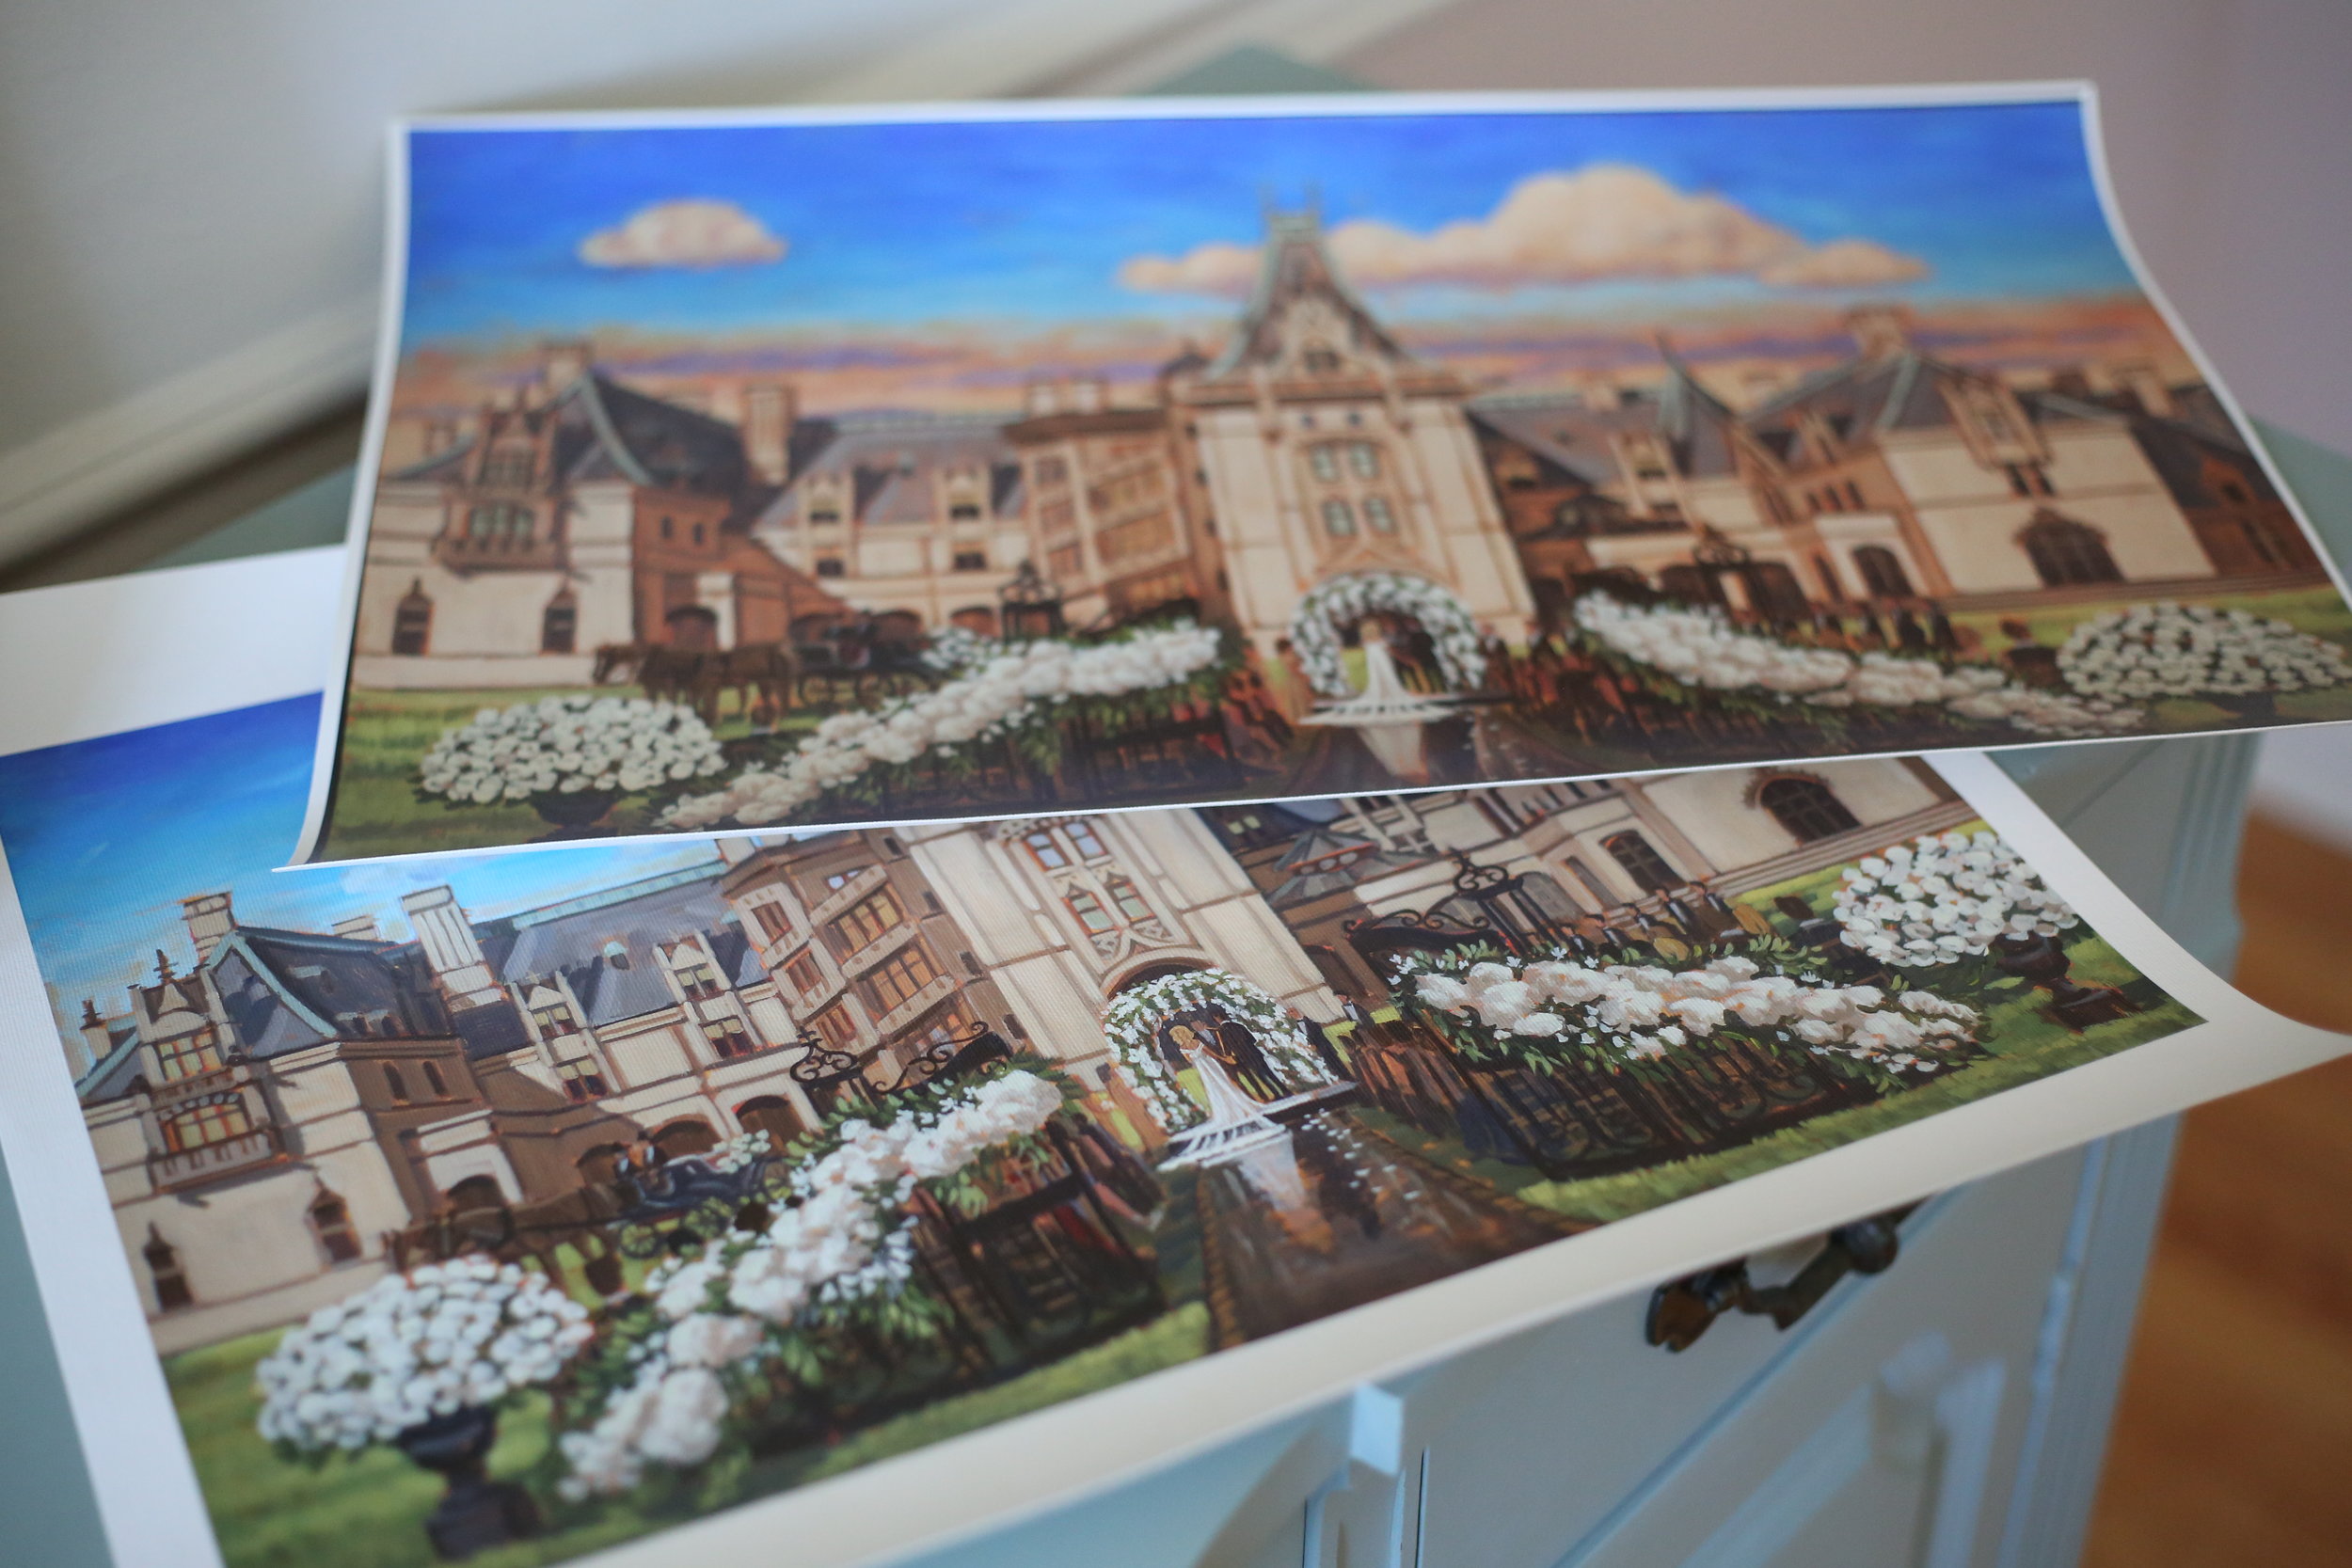 Here are the final proofs for the prints on canvas that were gifted to Emily + Rhyne's parents.